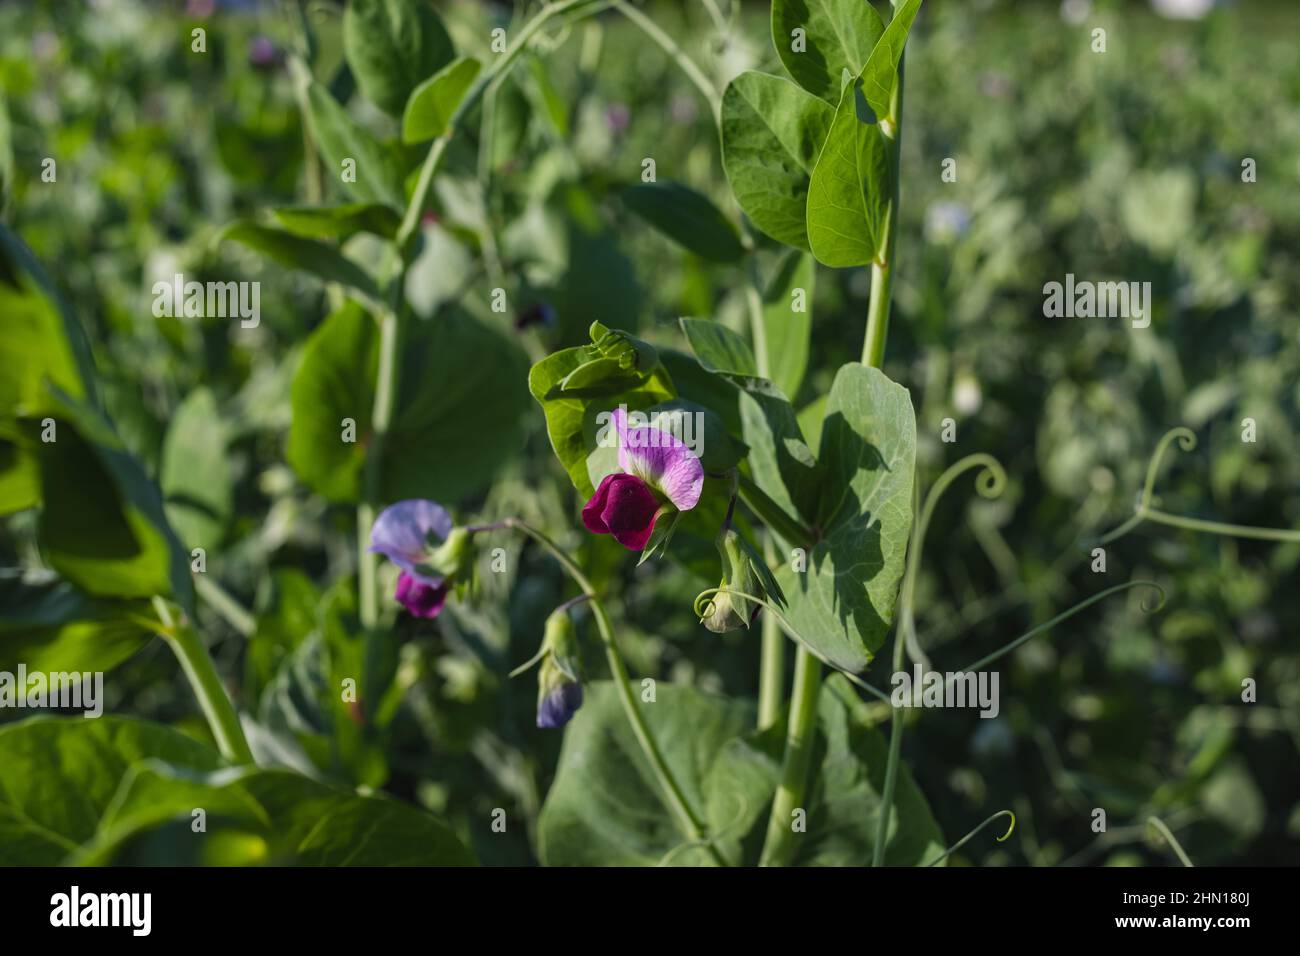 Summer Flowering Home Grown Organic Pea Plants. Growing up a Hazel Stick Wigwam on an Allotment in a Vegetable Garden in Rural region Stock Photo